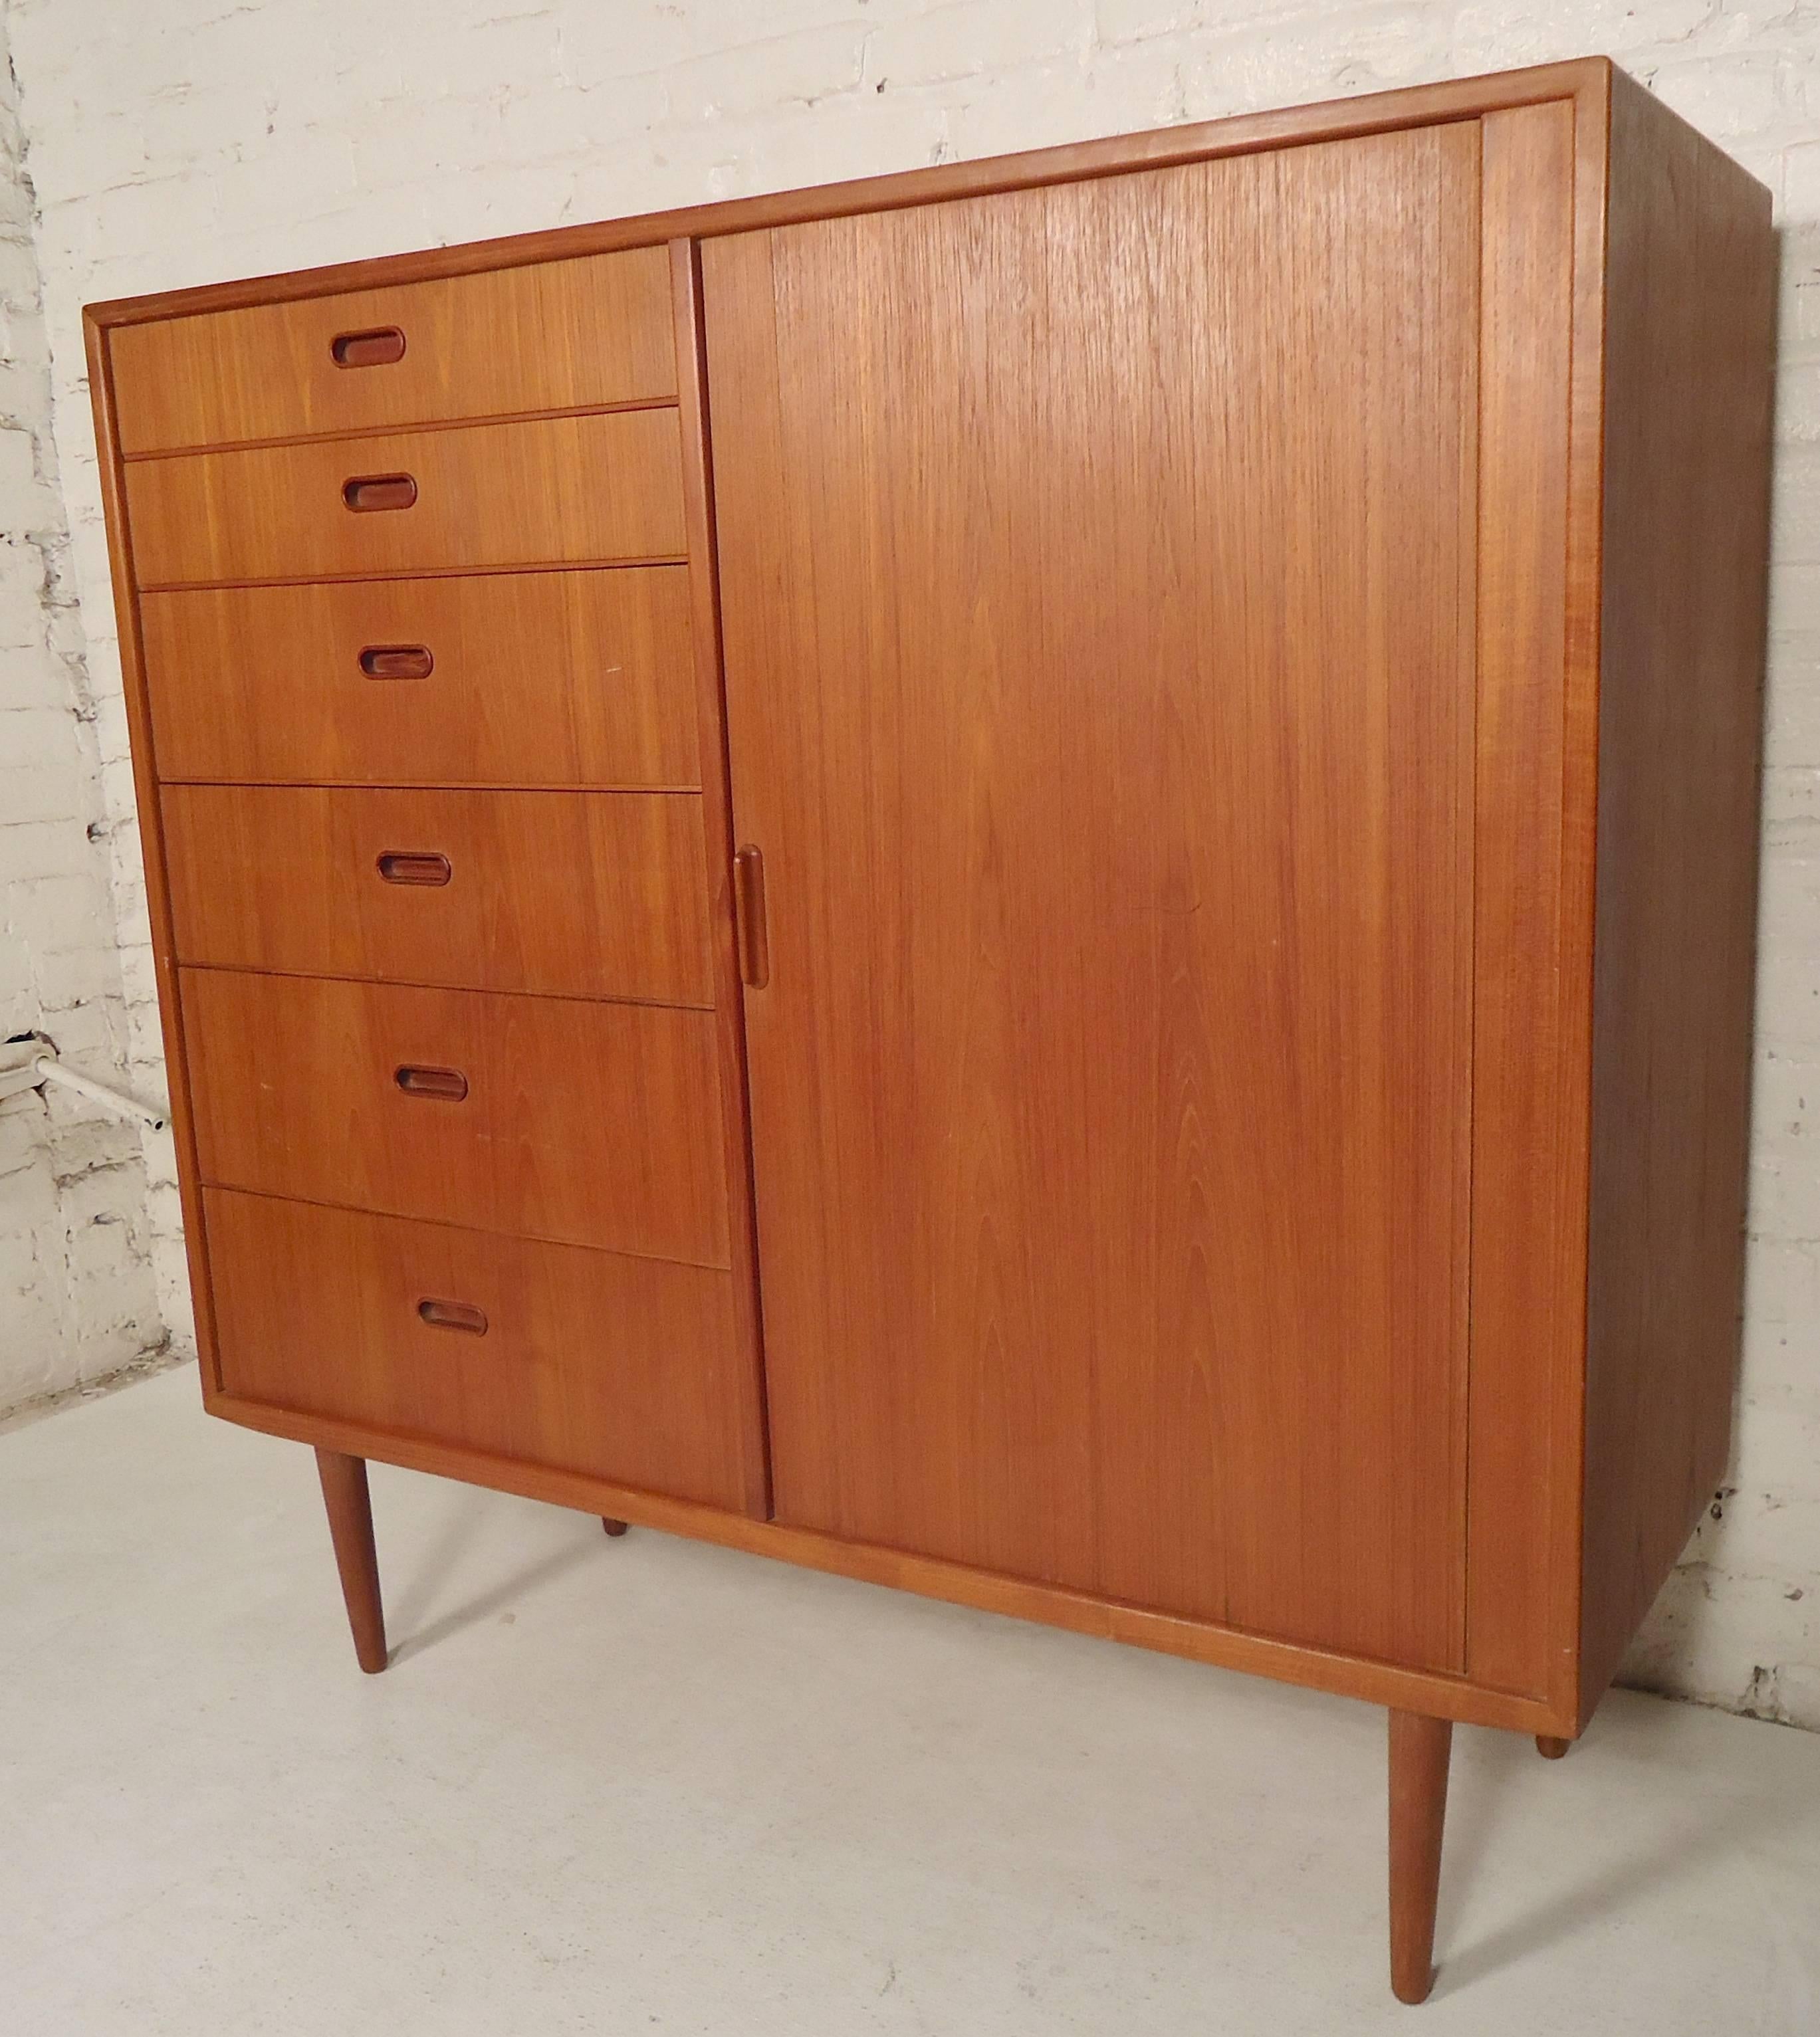 Mid-Century Modern dresser from Denmark with 12 total drawers. Attractive inset handles and tapered legs.

(Please confirm item location - NY or NJ - with dealer).
 